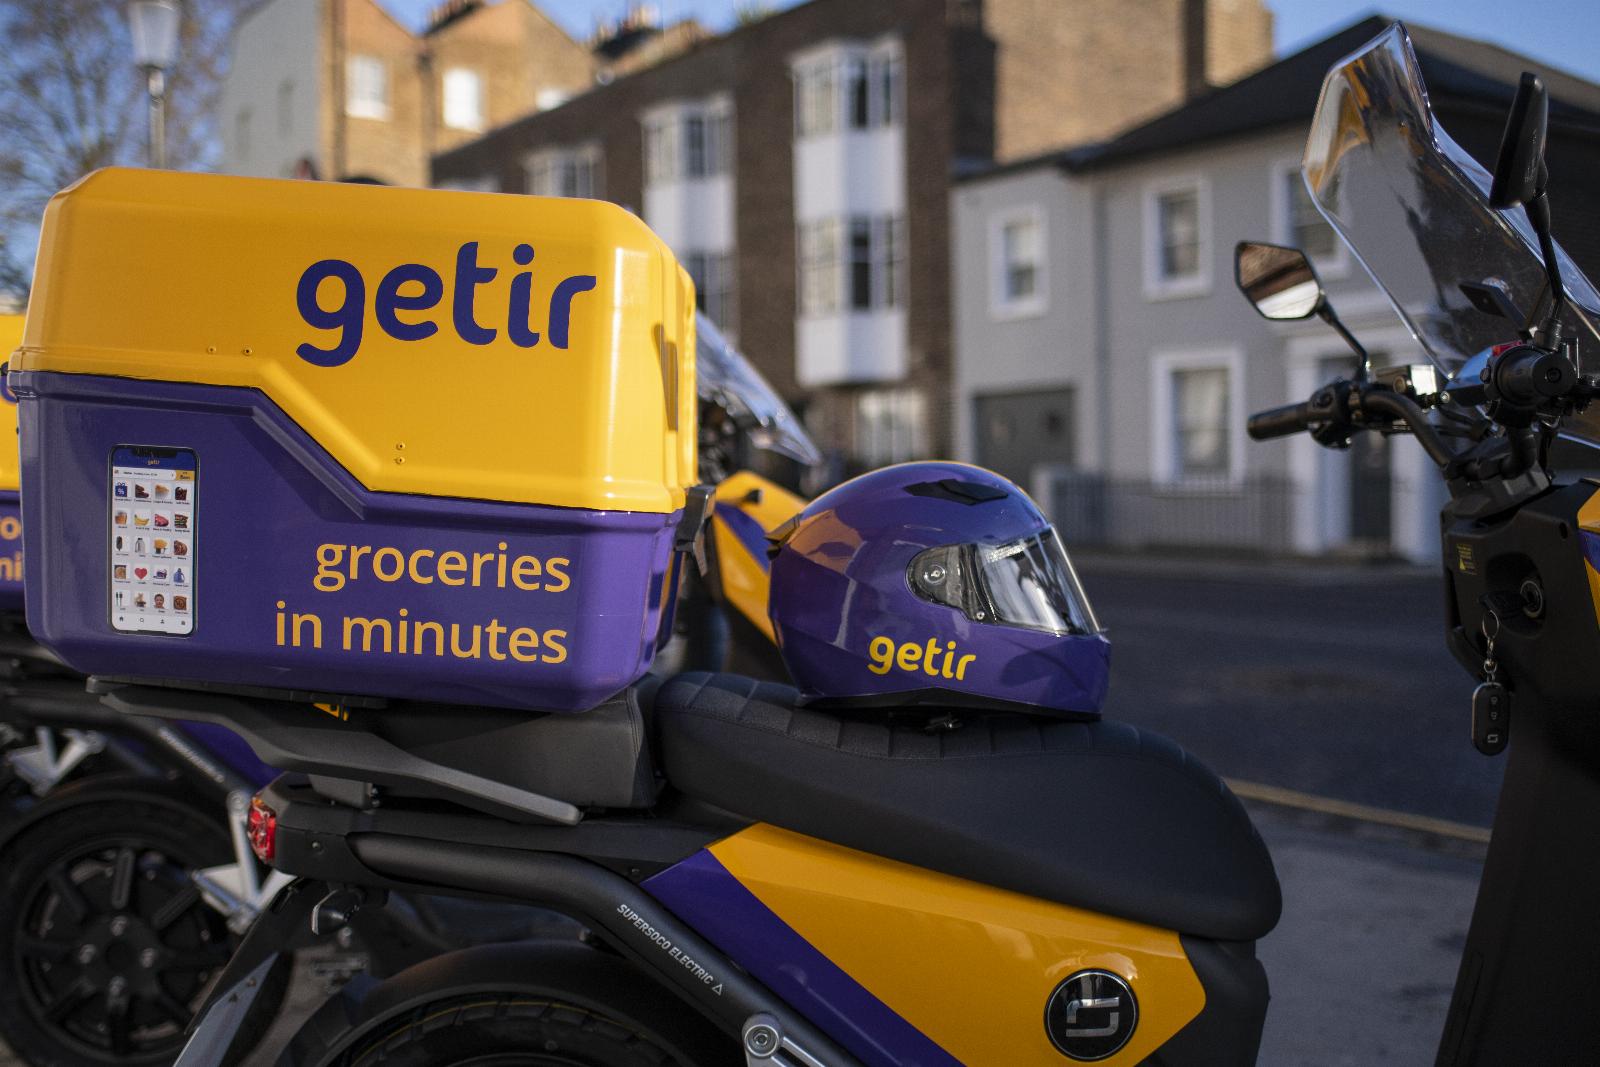 Quick commerce startup Getir plans to exit France amid regulatory issues